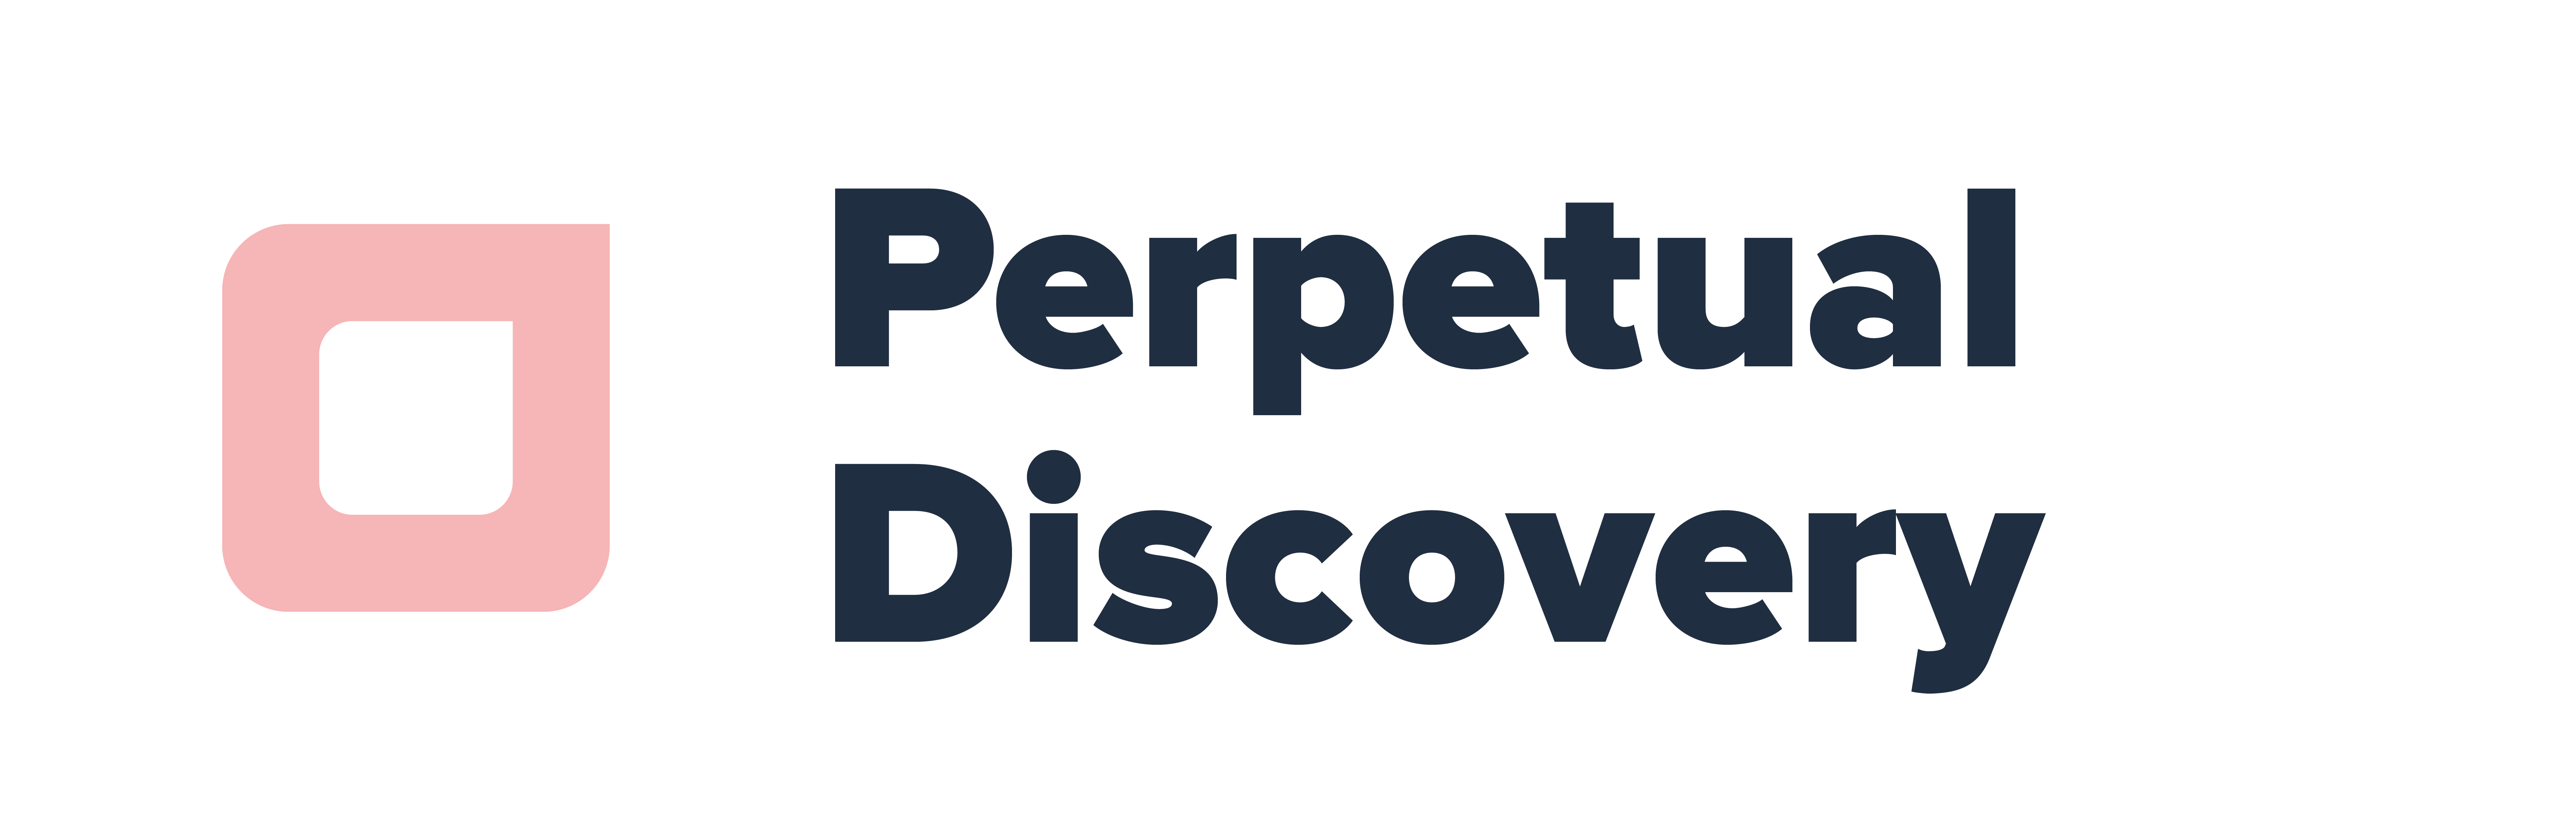 Perpetual Discovery